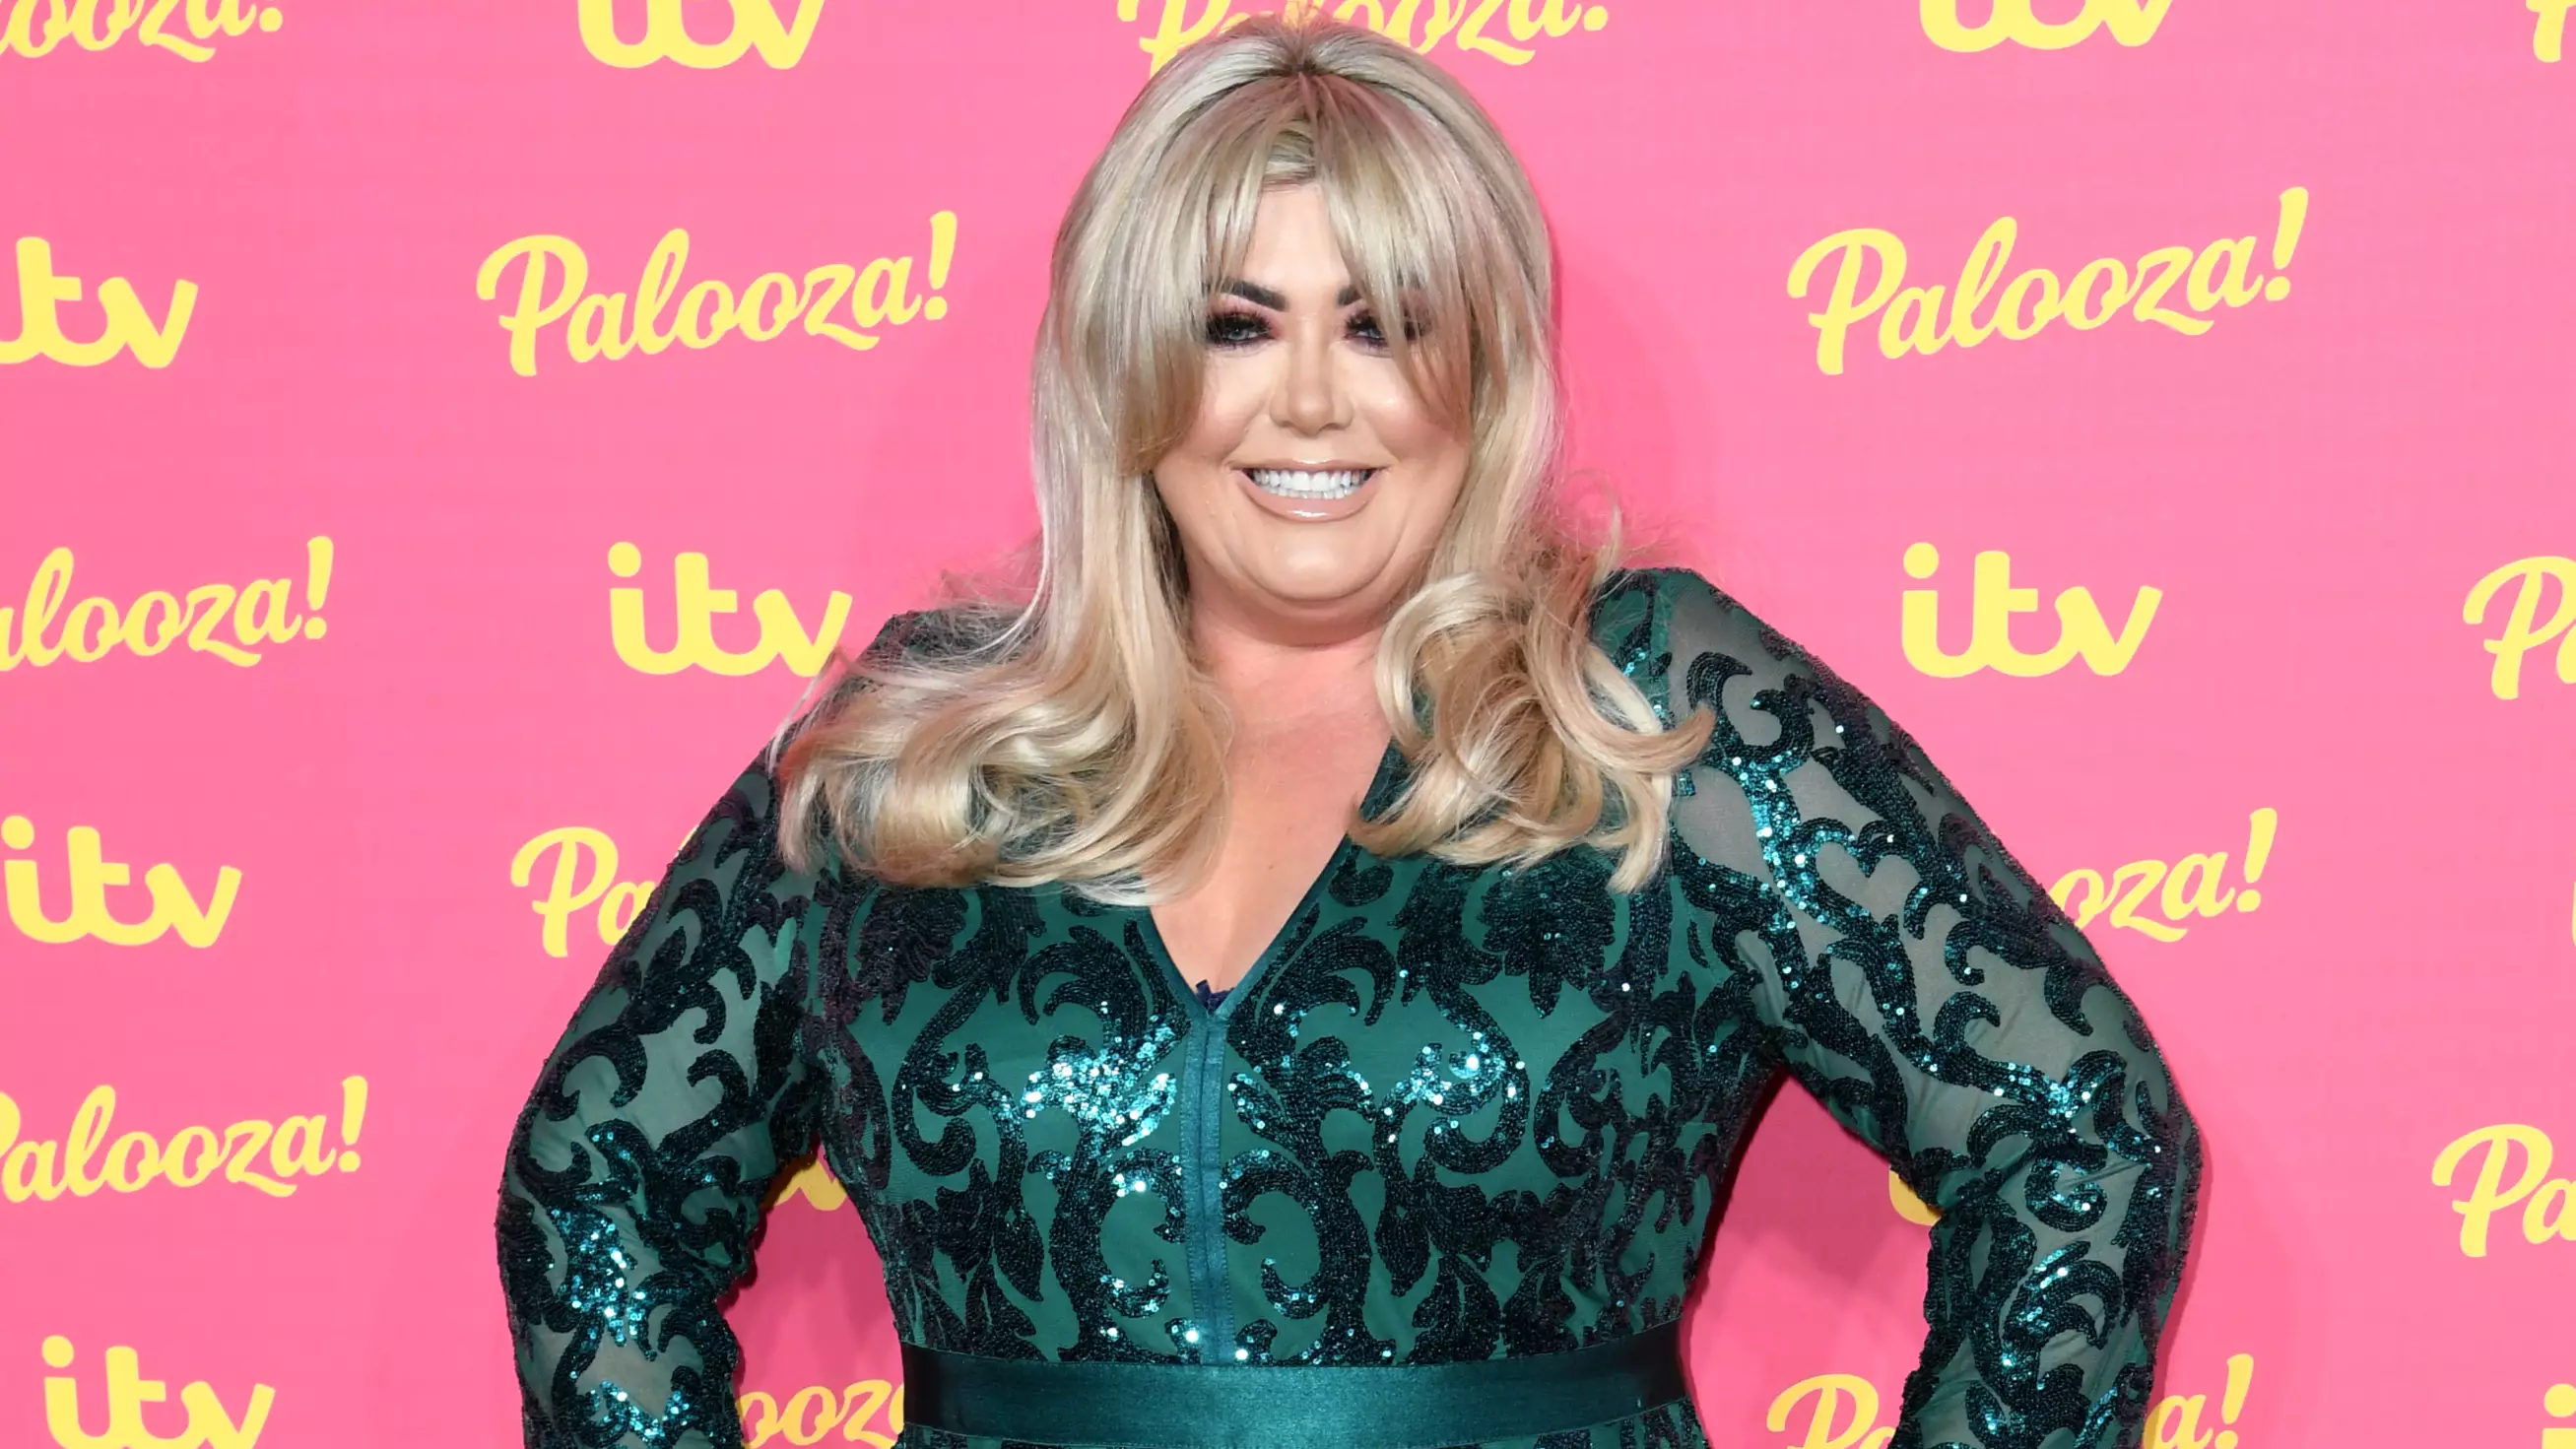 A Drive-In Bingo Event Is Coming To The UK Featuring Gemma Collins And East 17